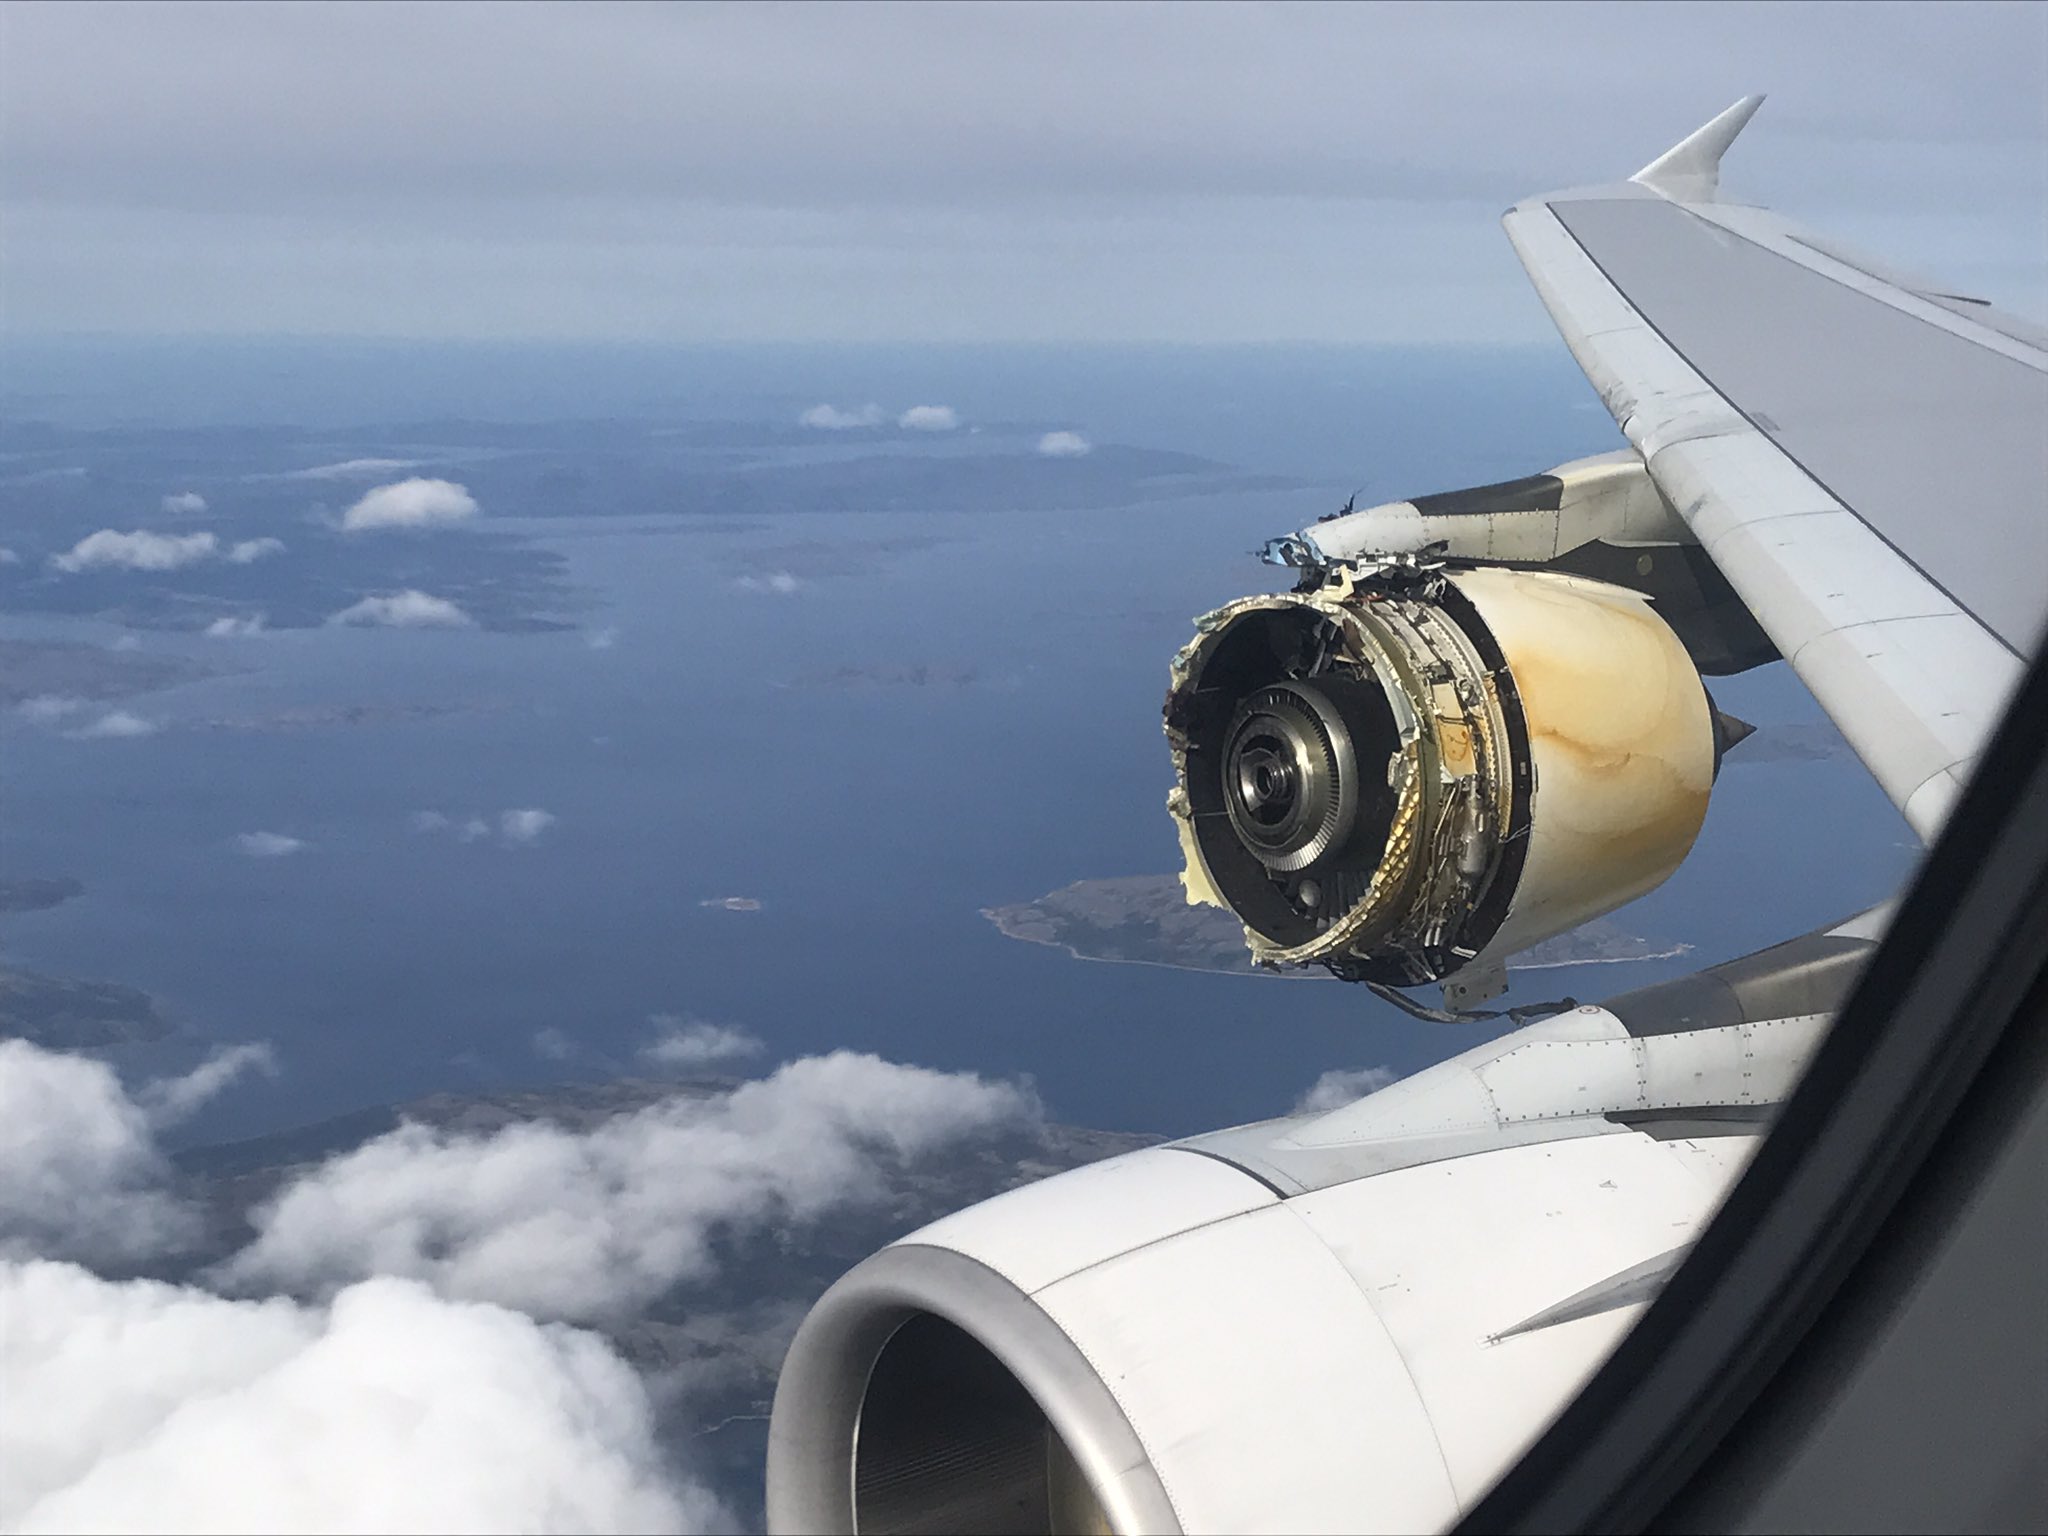 Plane missing an engine